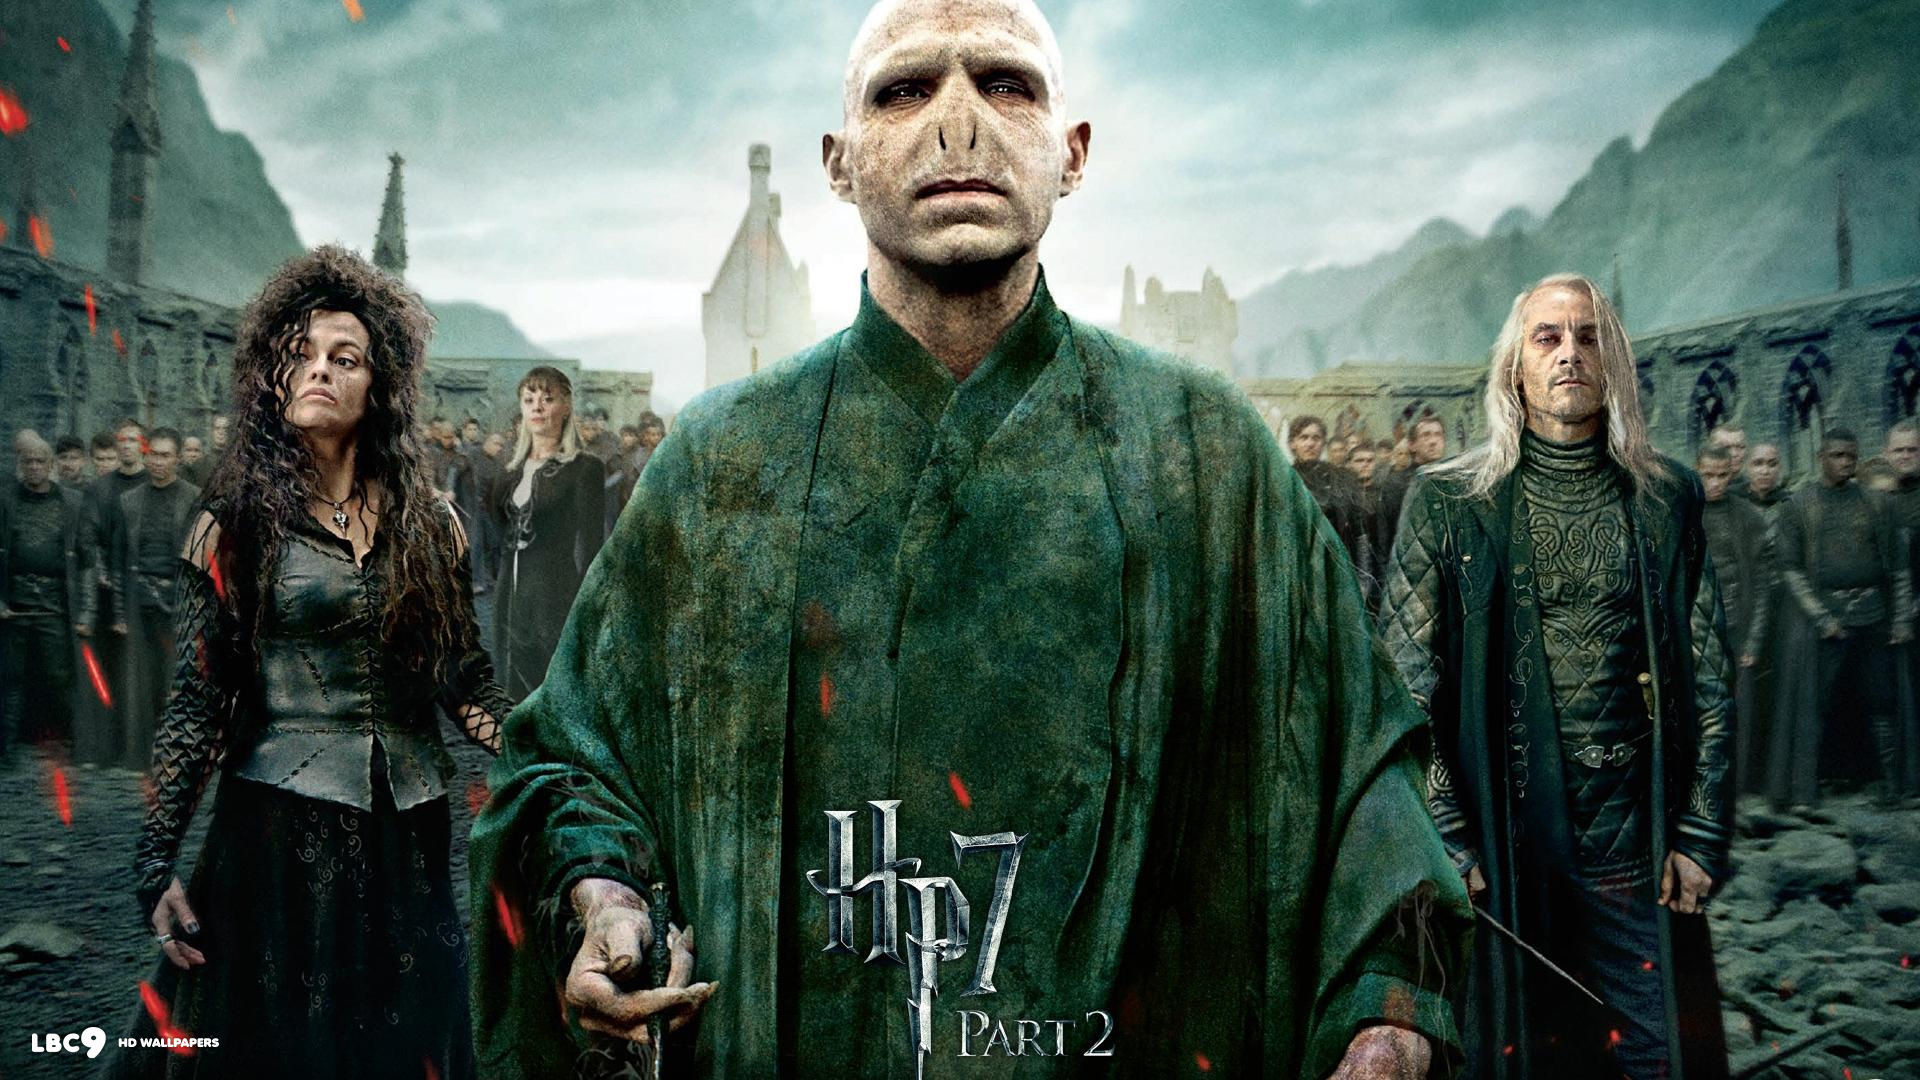 1920x1080 harry potter and the deathly hallows part 2 10 1080p